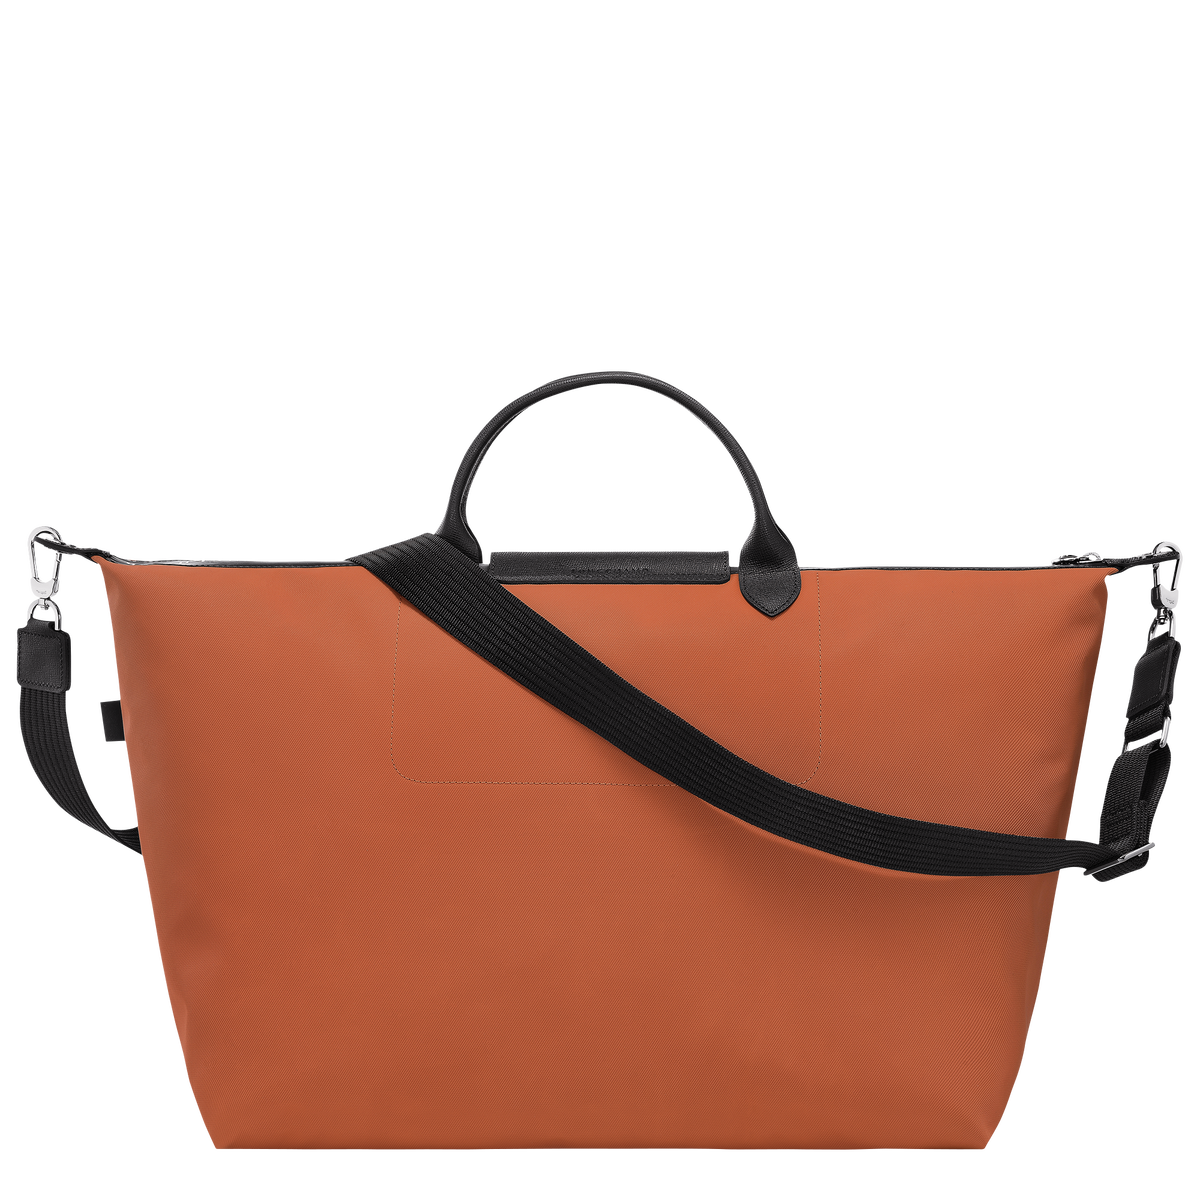 Le Pliage Energy S Travel bag Sienna - Recycled canvas | Longchamp US